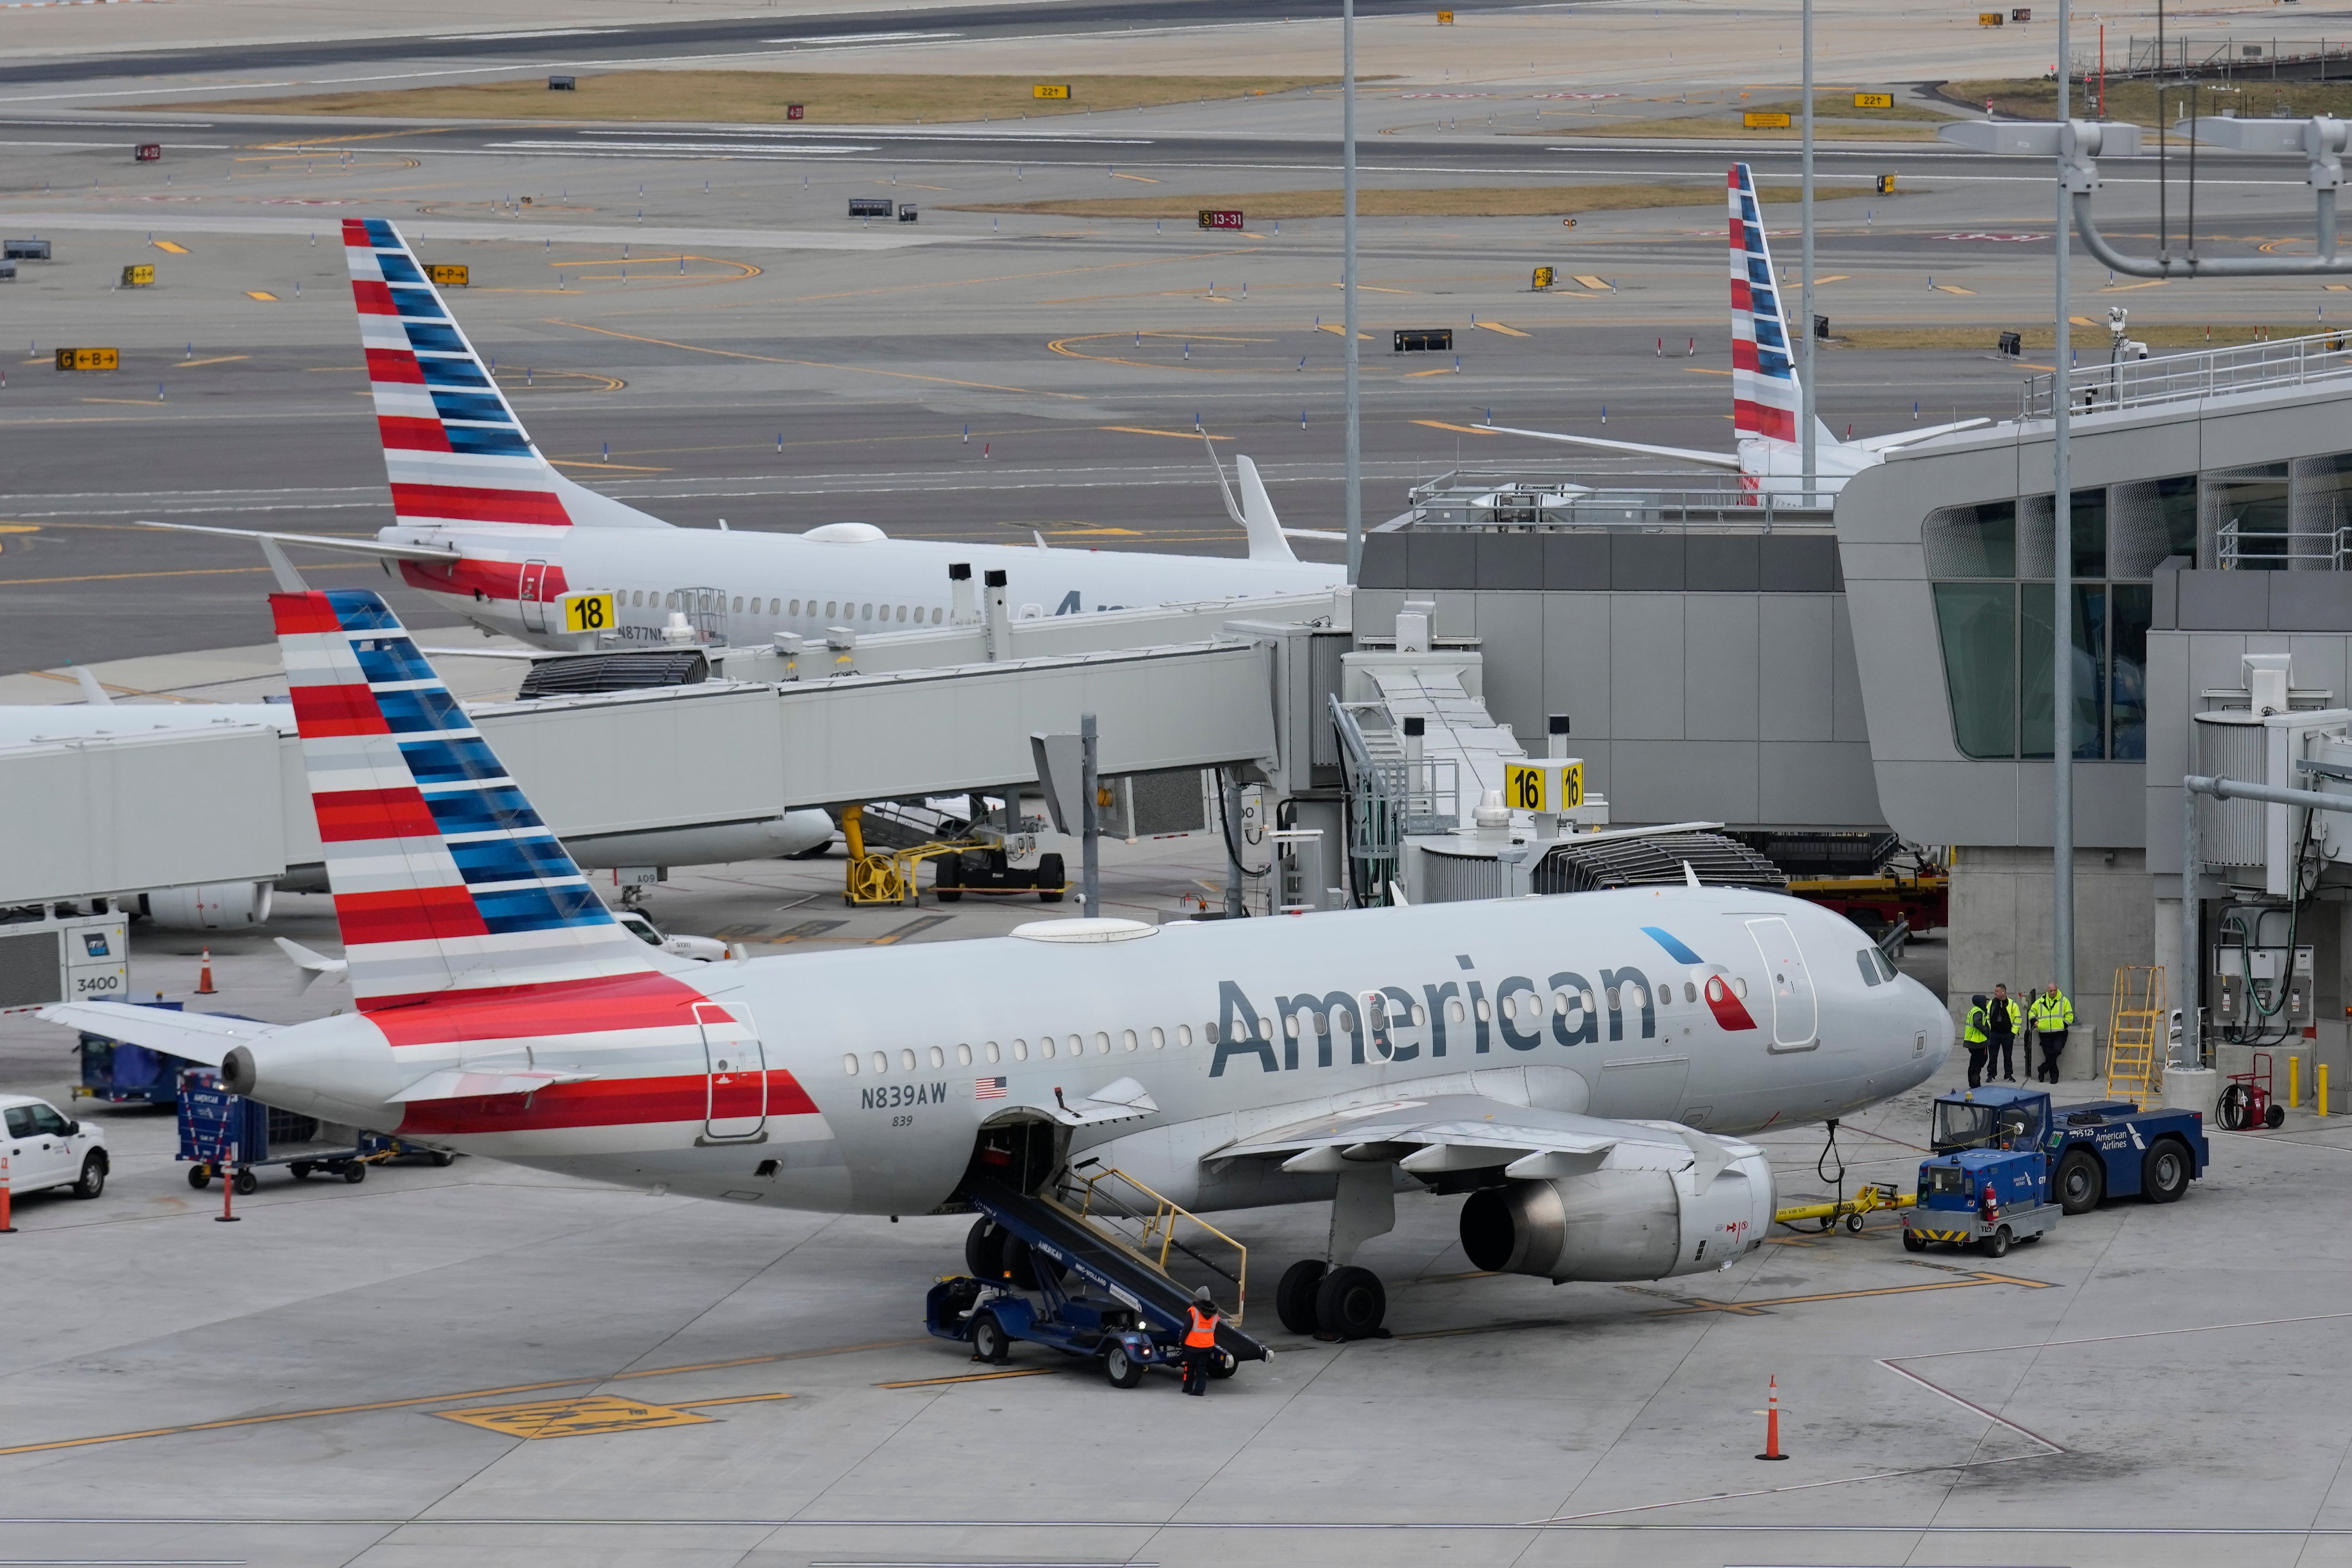 American Airlines passengers were left stuck in Boston after their flight was forced to land by a crack in the windshield